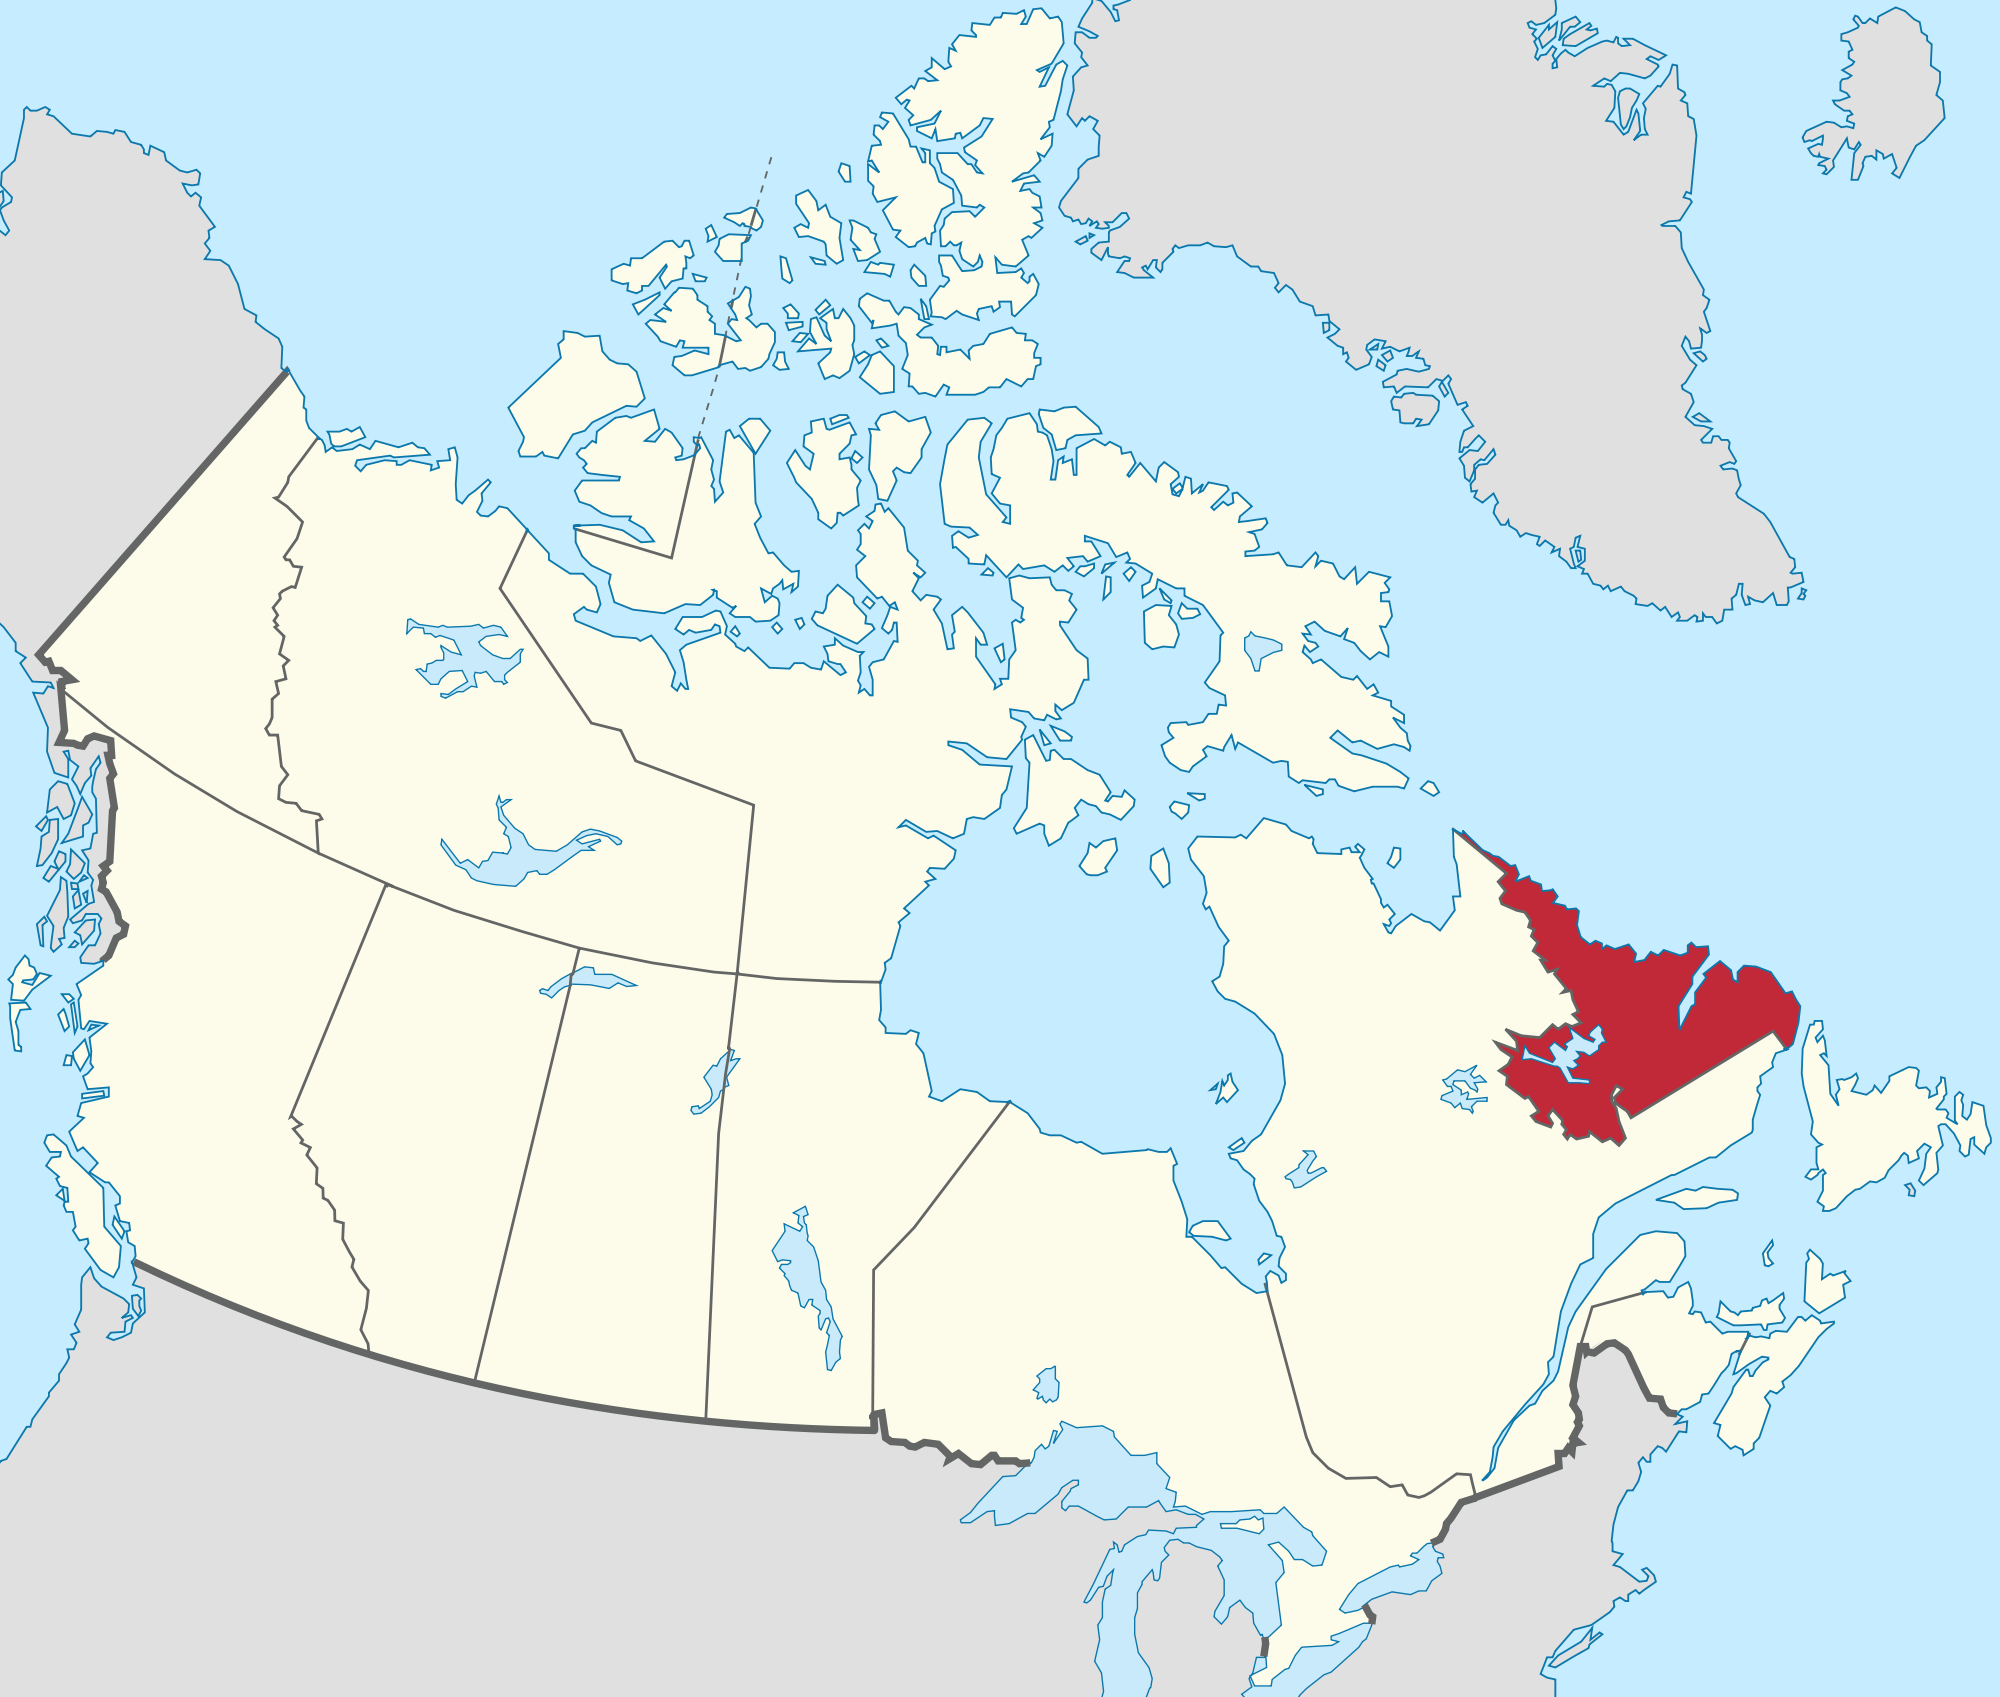 http://upload.wikimedia.org/wikipedia/commons/d/d8/Labrador-Region.PNG